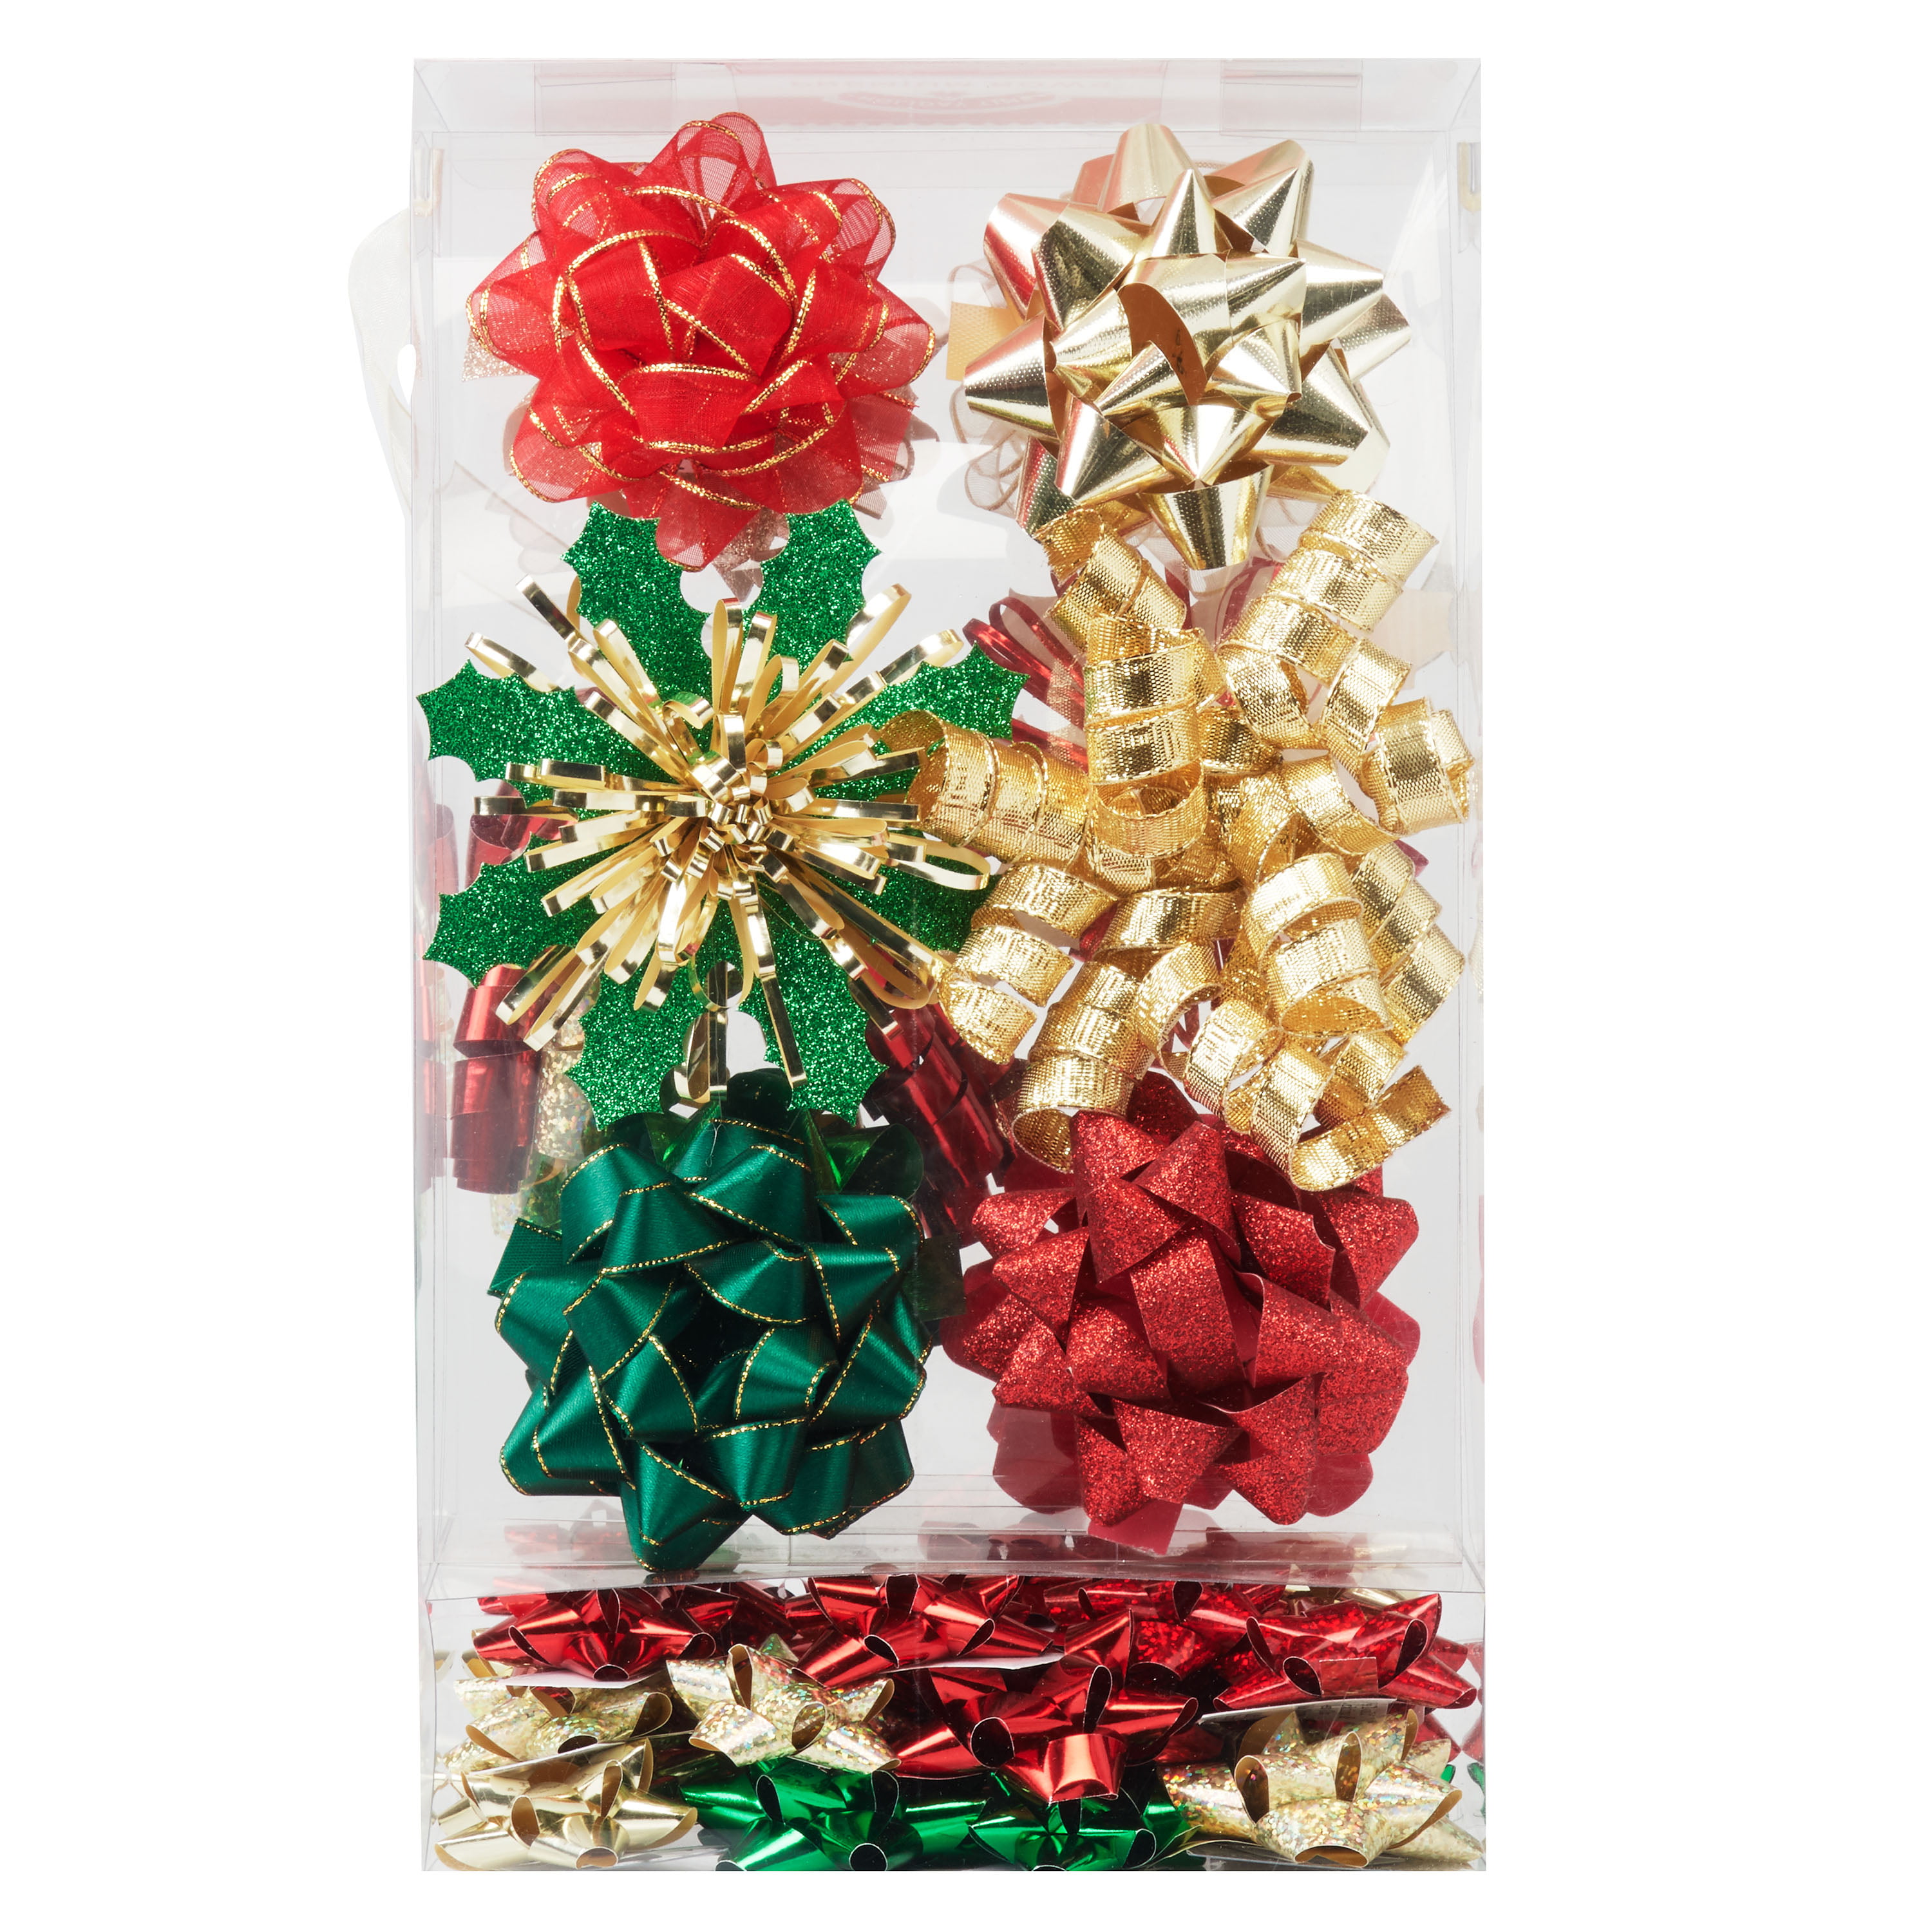 Ø 6 cm com-four® 48x gift bow metallic in finished bow as decoration for Christmas and gifts 0048 pieces - star 